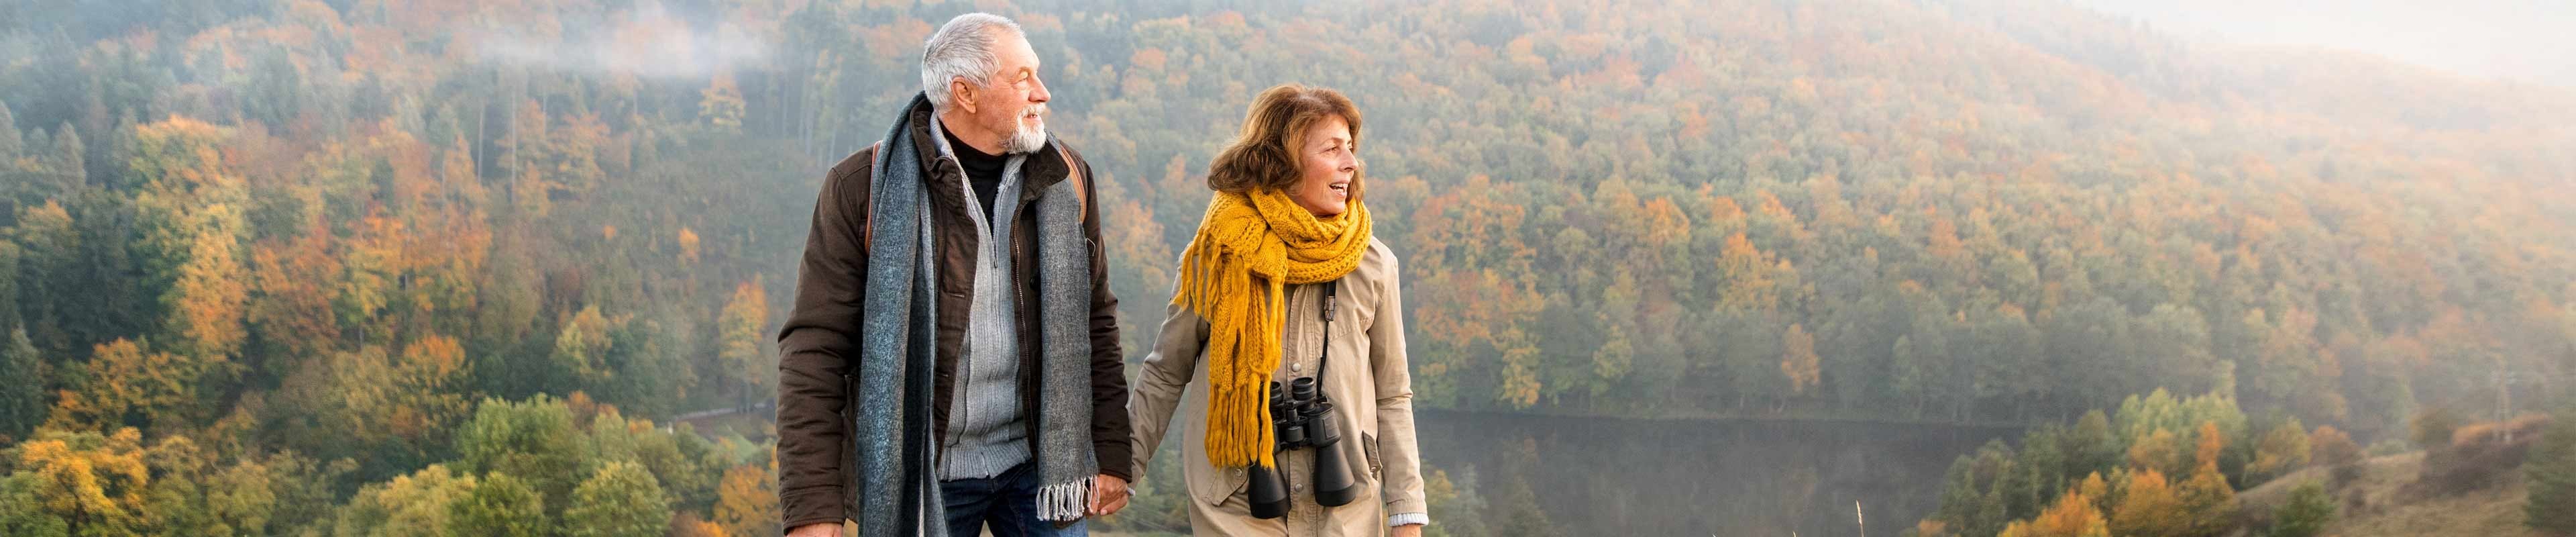 A elderly white man with a short-cropped white beard and an elderly white woman with dyed light brown hair holding hands on a mountain overlooking a lake in the autumn.